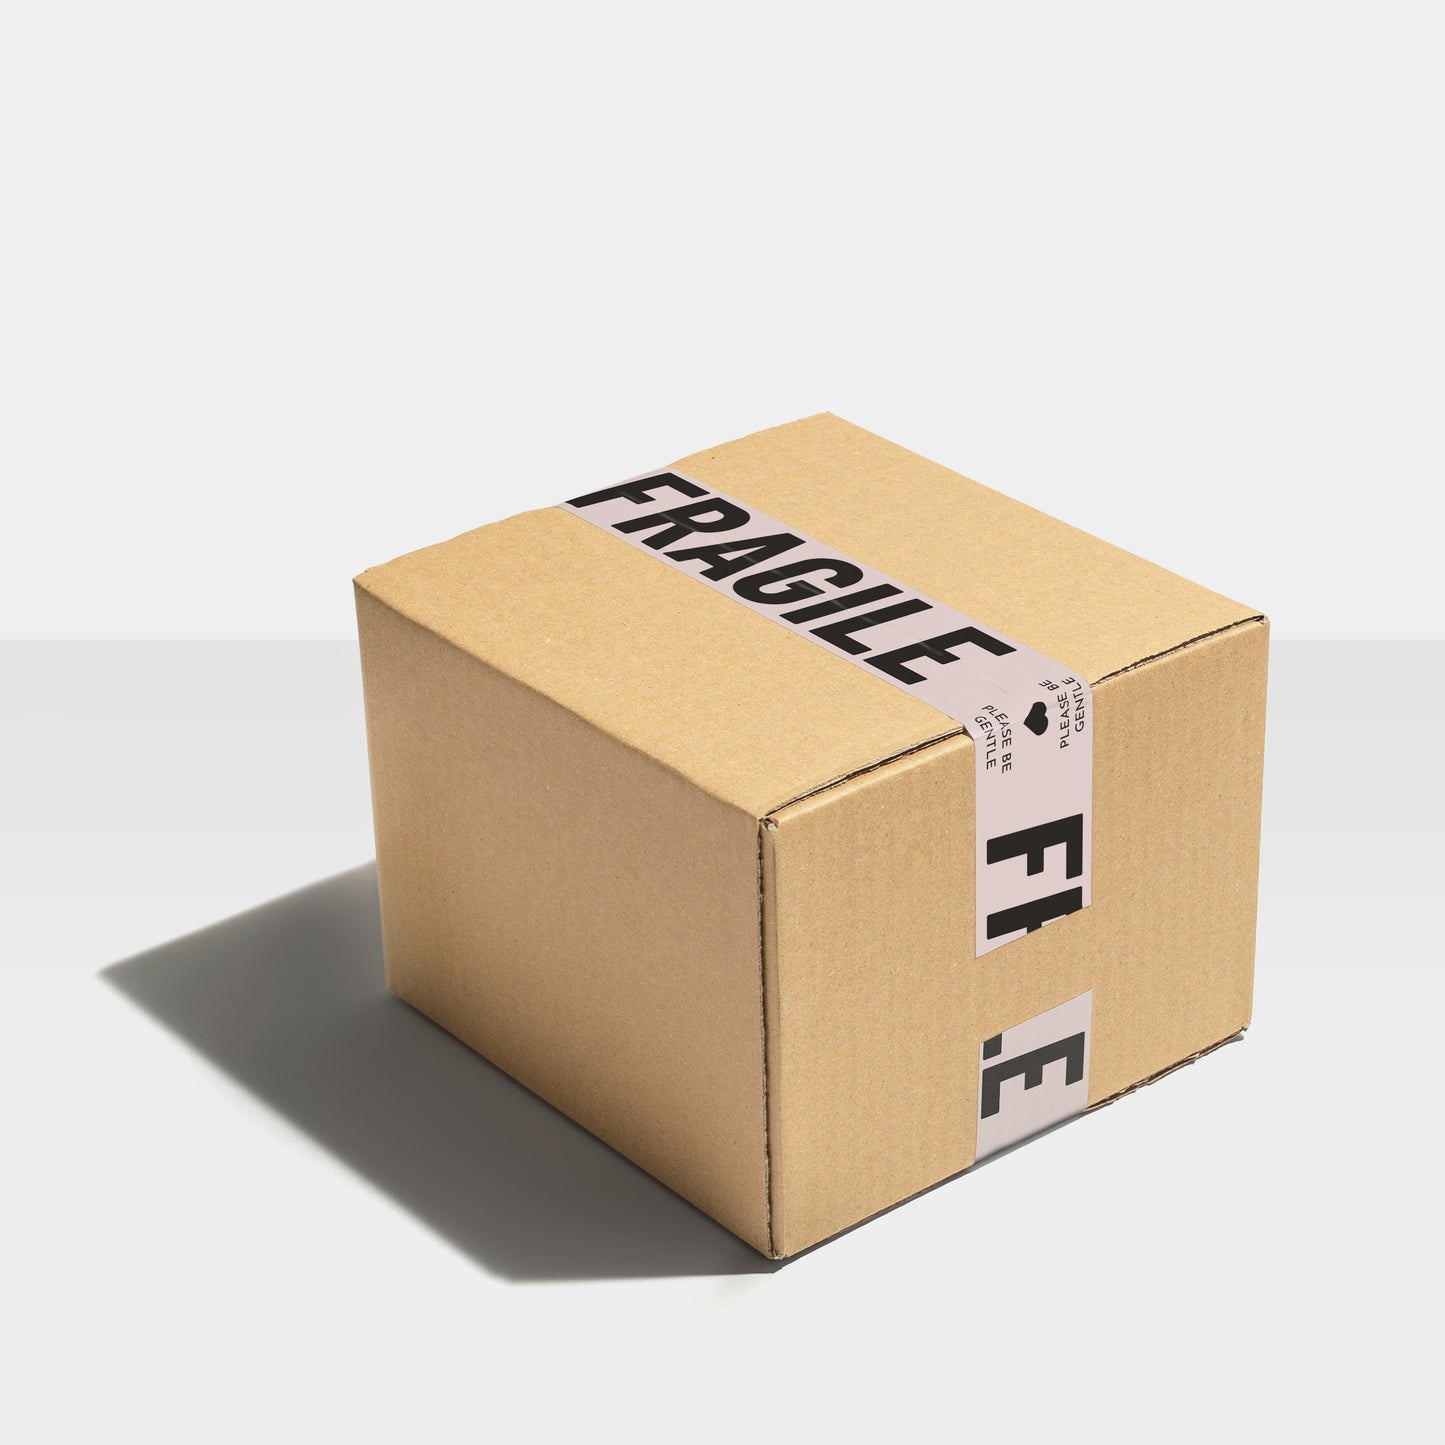 Large shipping box sealed with modern bold black text sealing tape with the words "Fragile, Please Be Gentle" printed on it.